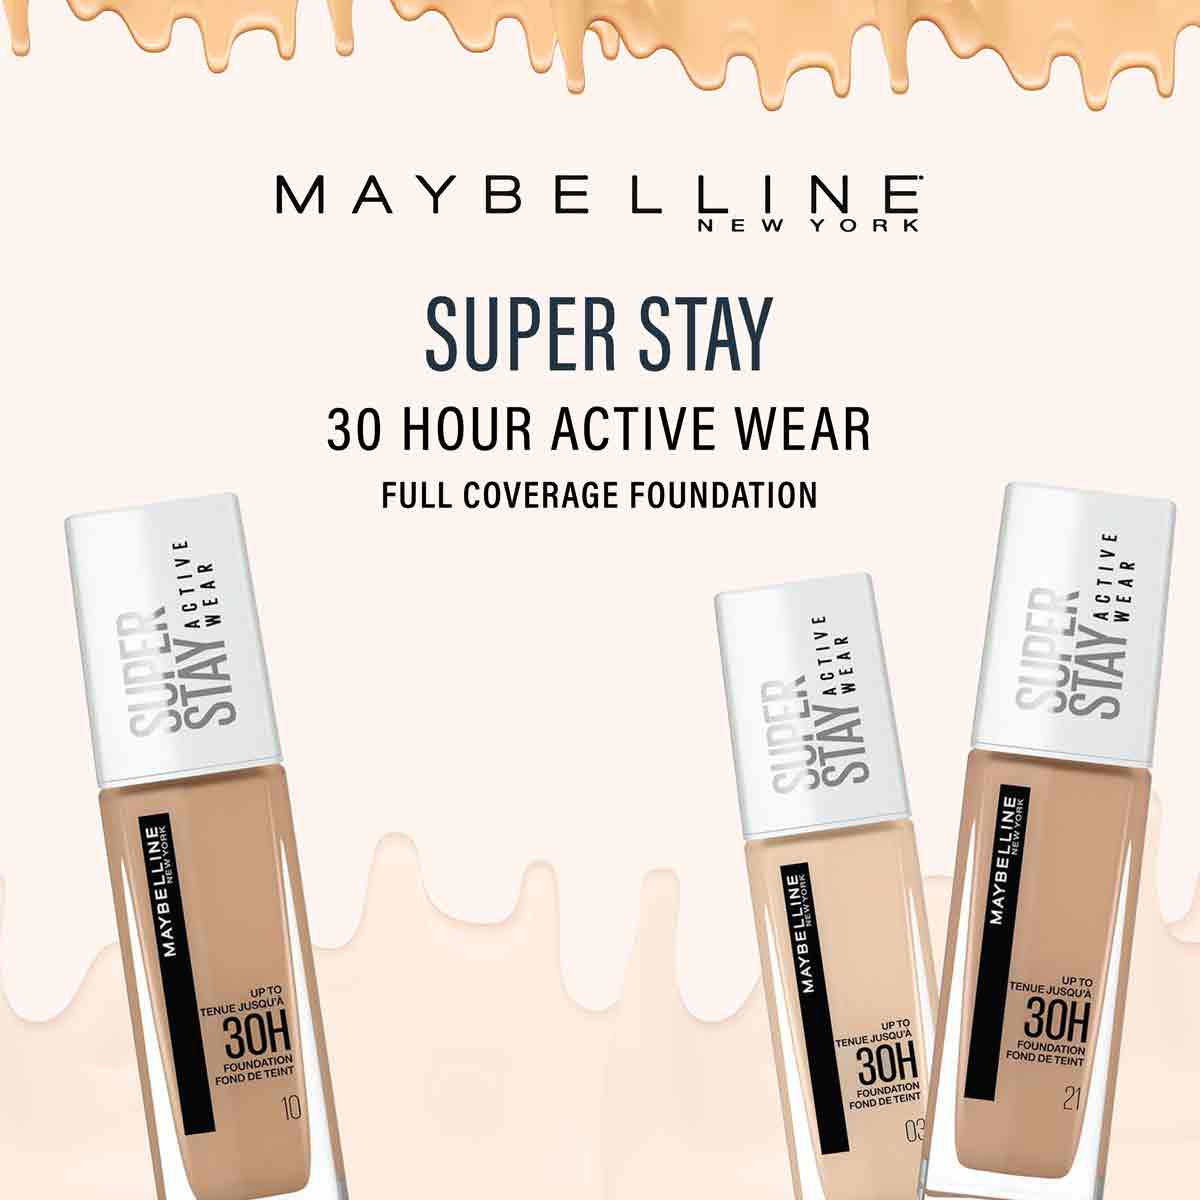 Wear Full Maybelline Foundation 30 Hour Superstay Active Coverage